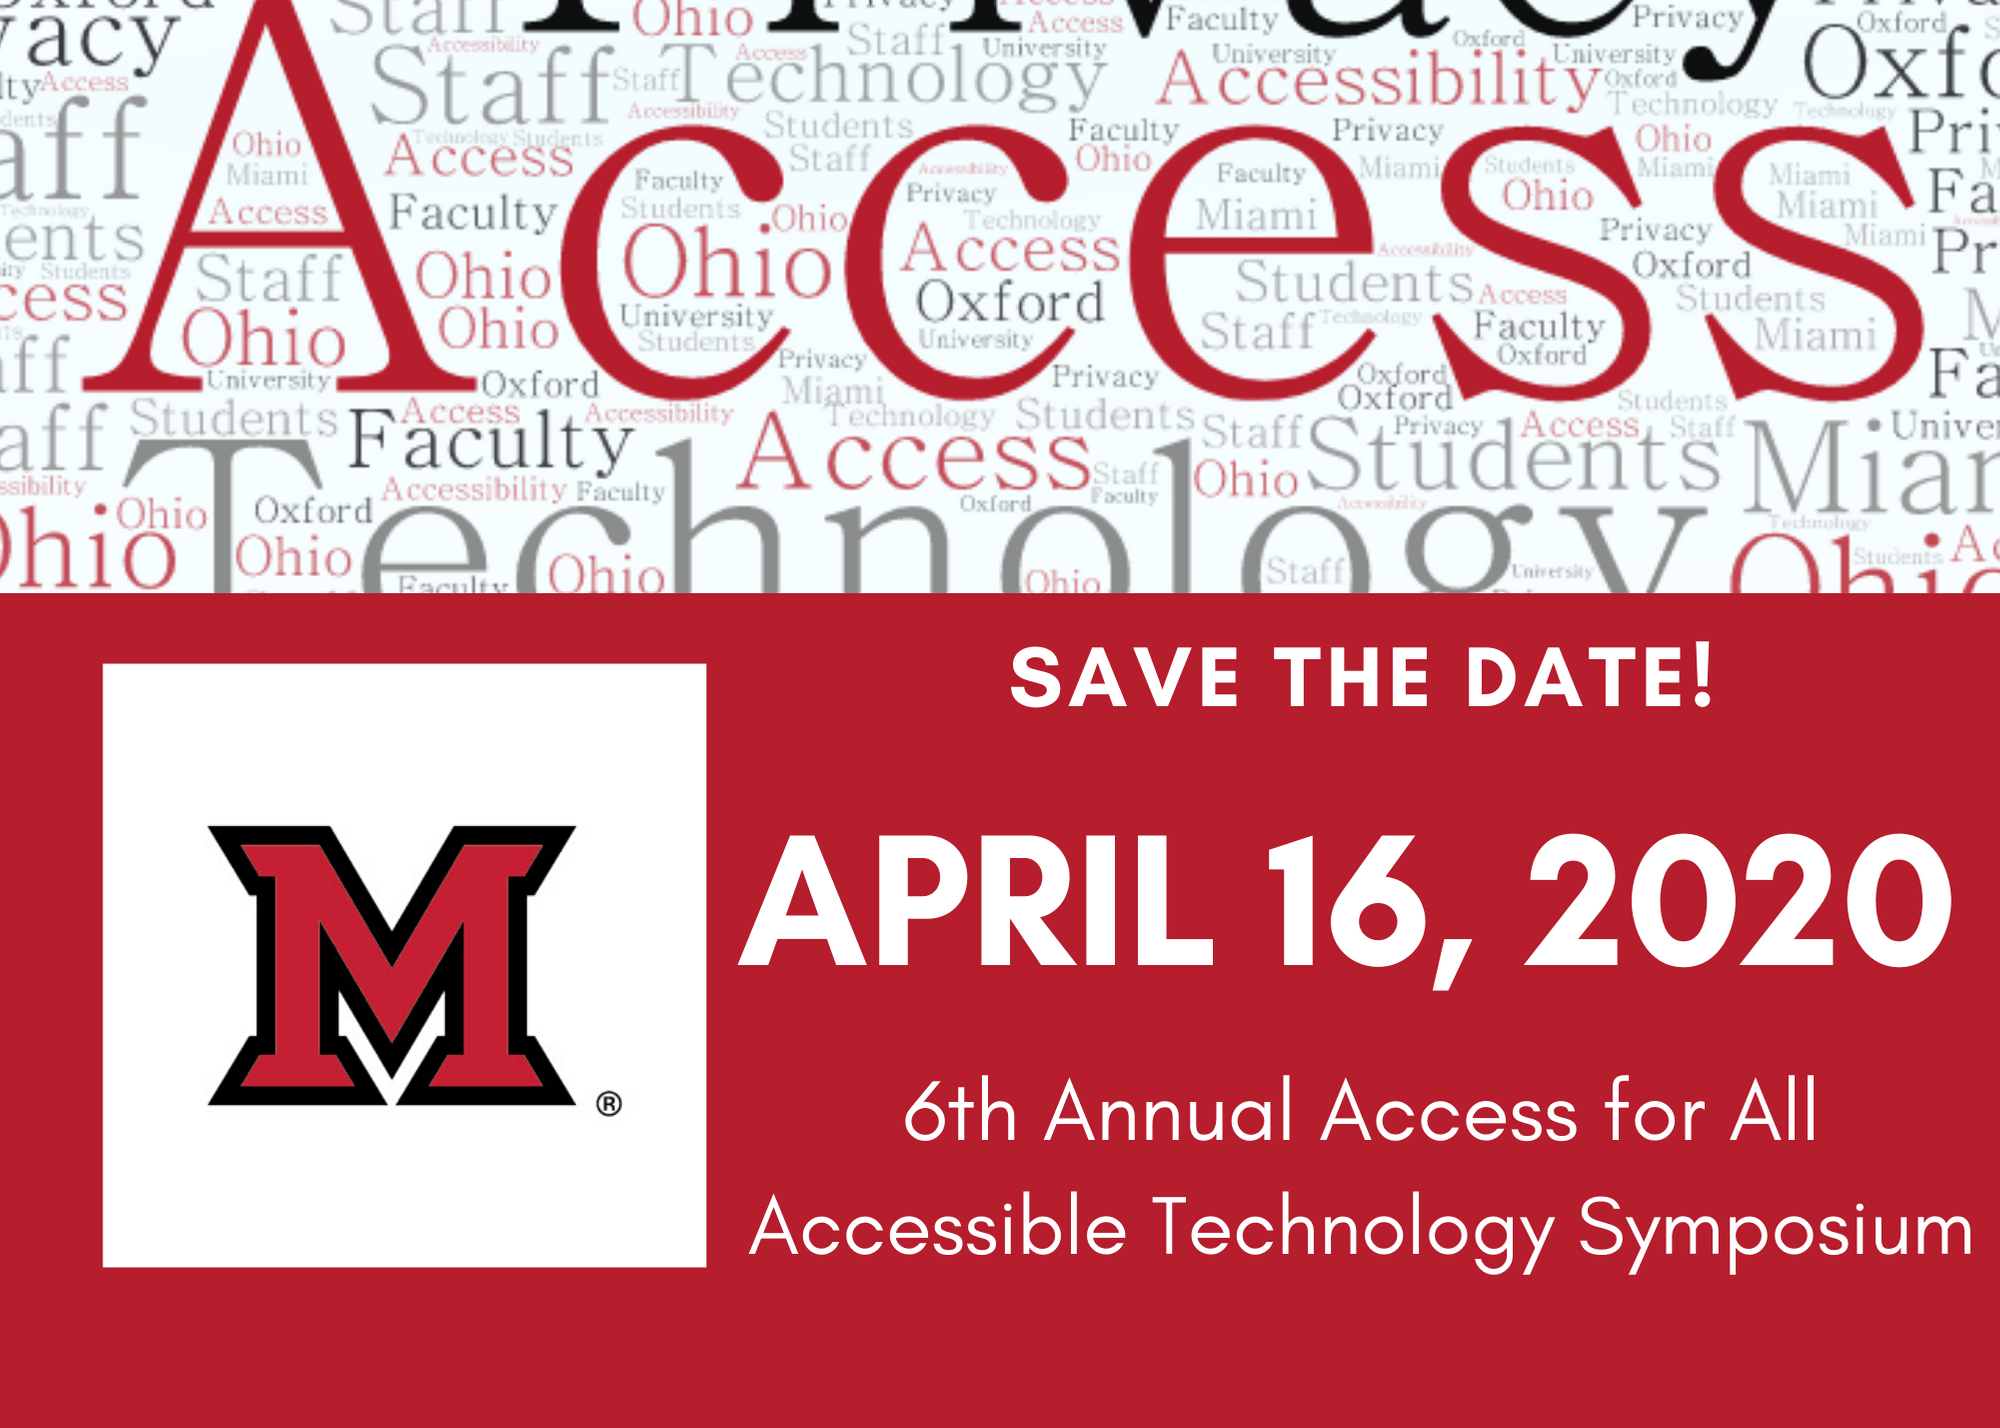 Save the Date! 4/16/2020 6th Annual Access For All Accessible Technology Symposium